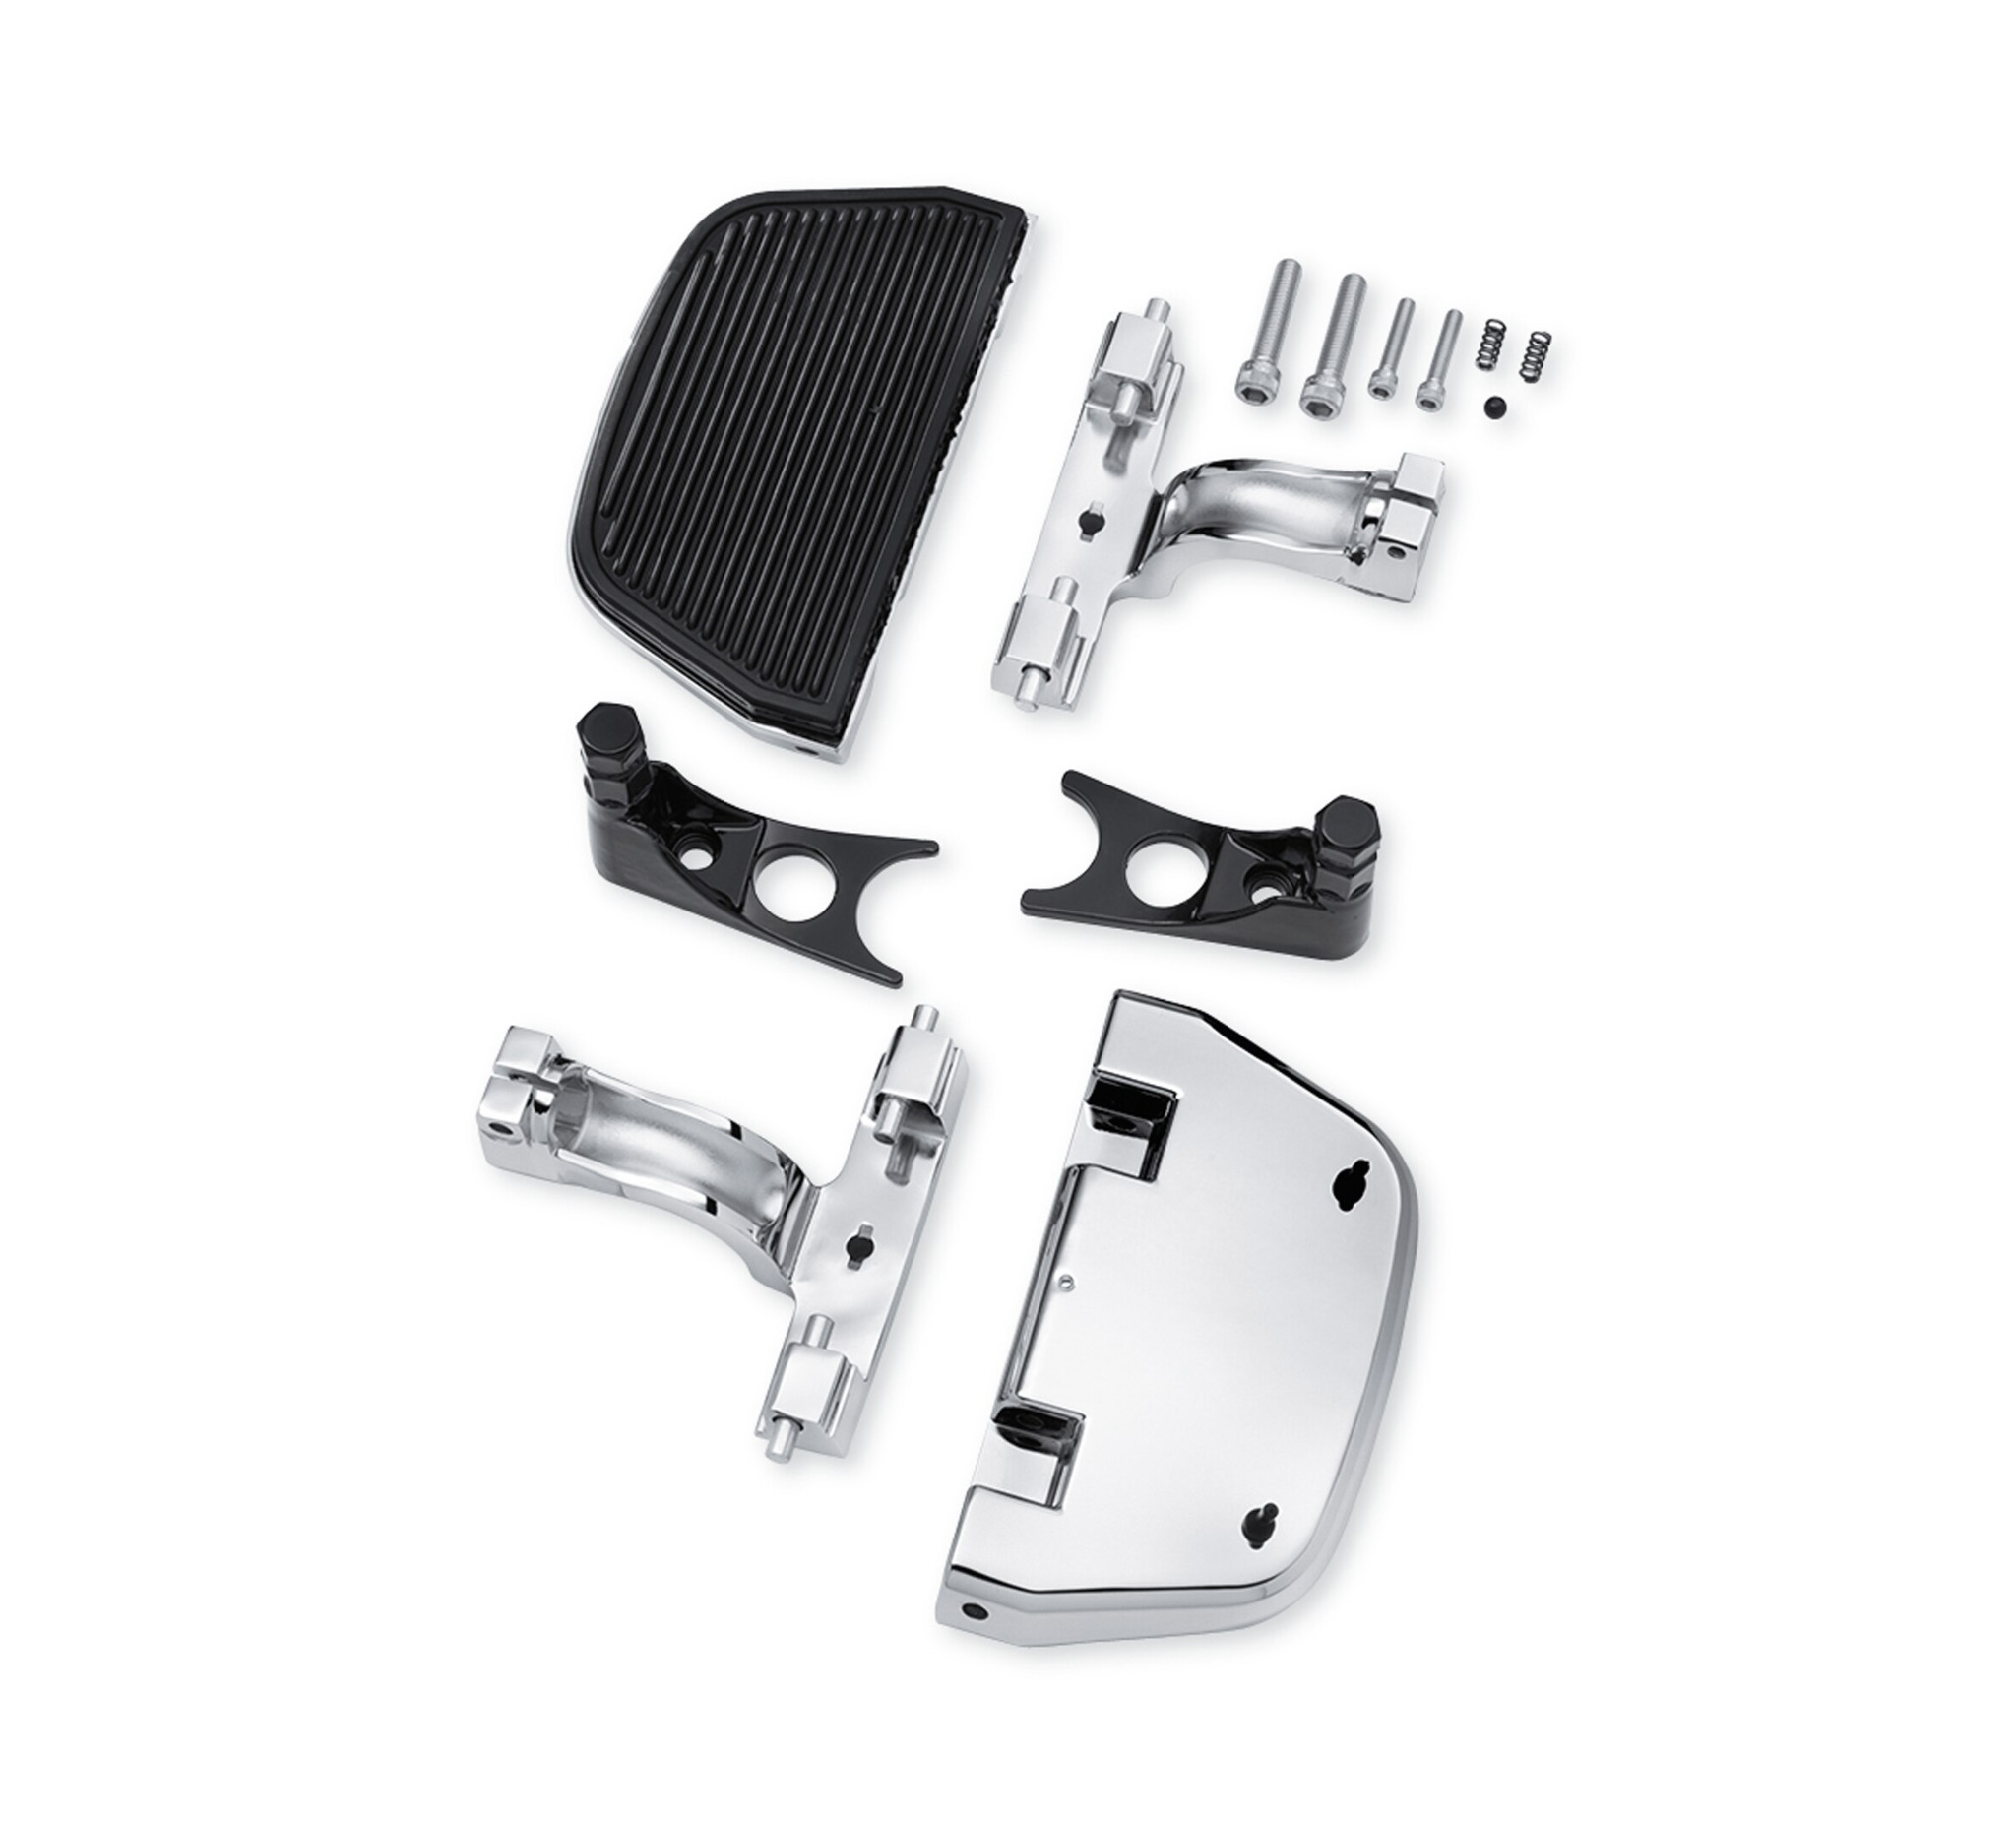 Chrome Softail Passenger Footboard and Mount Kit